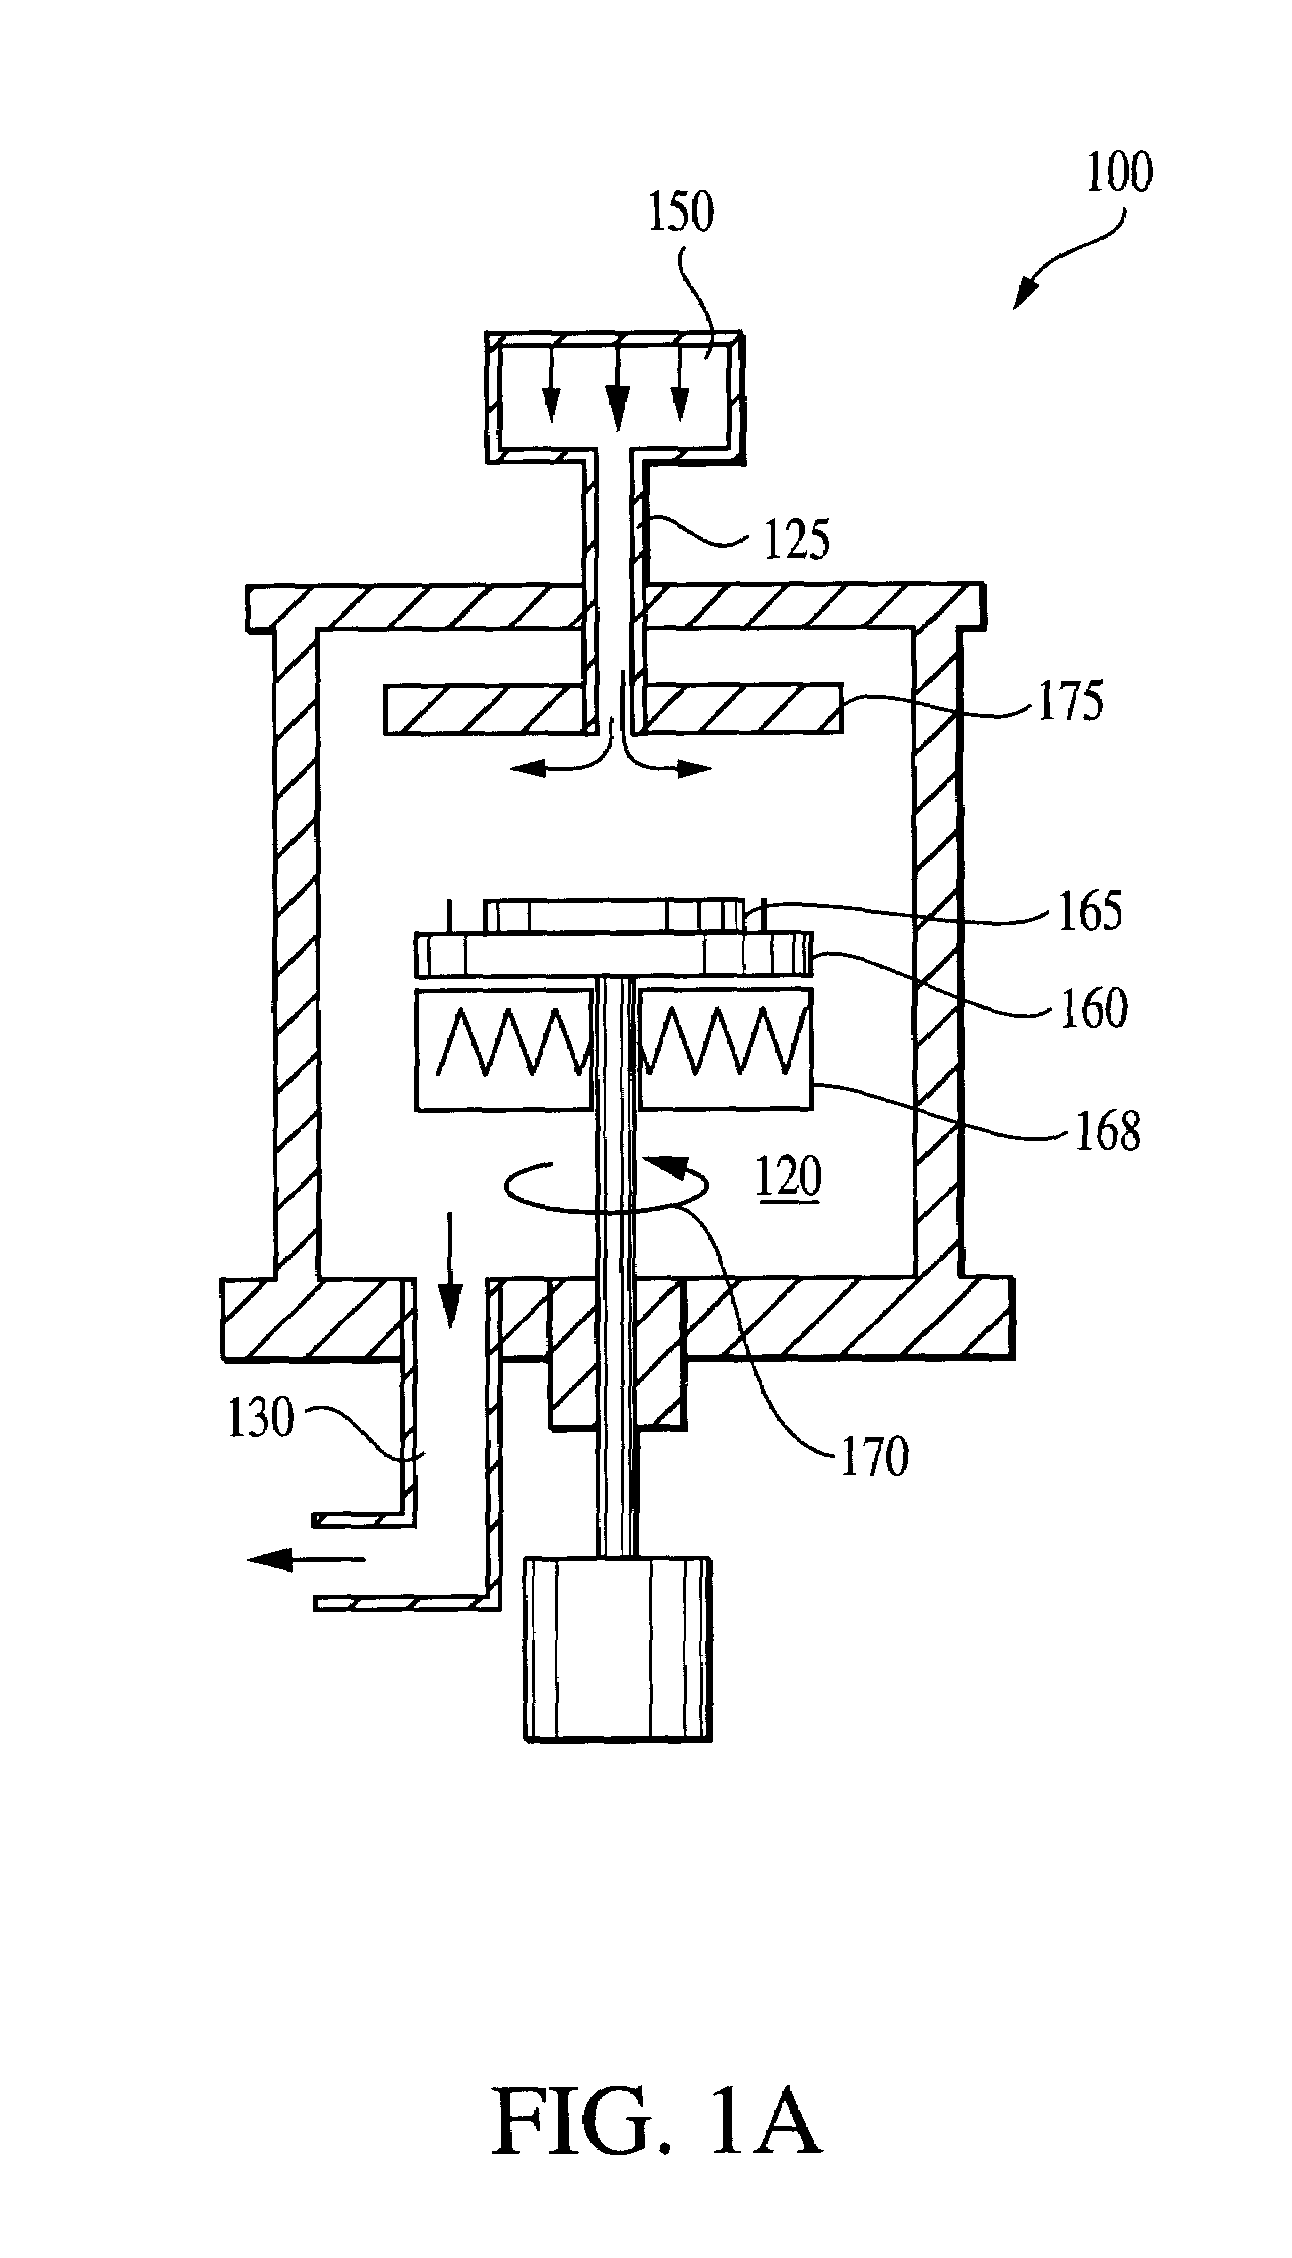 Method of feedback control of sub-atmospheric chemical vapor deposition processes